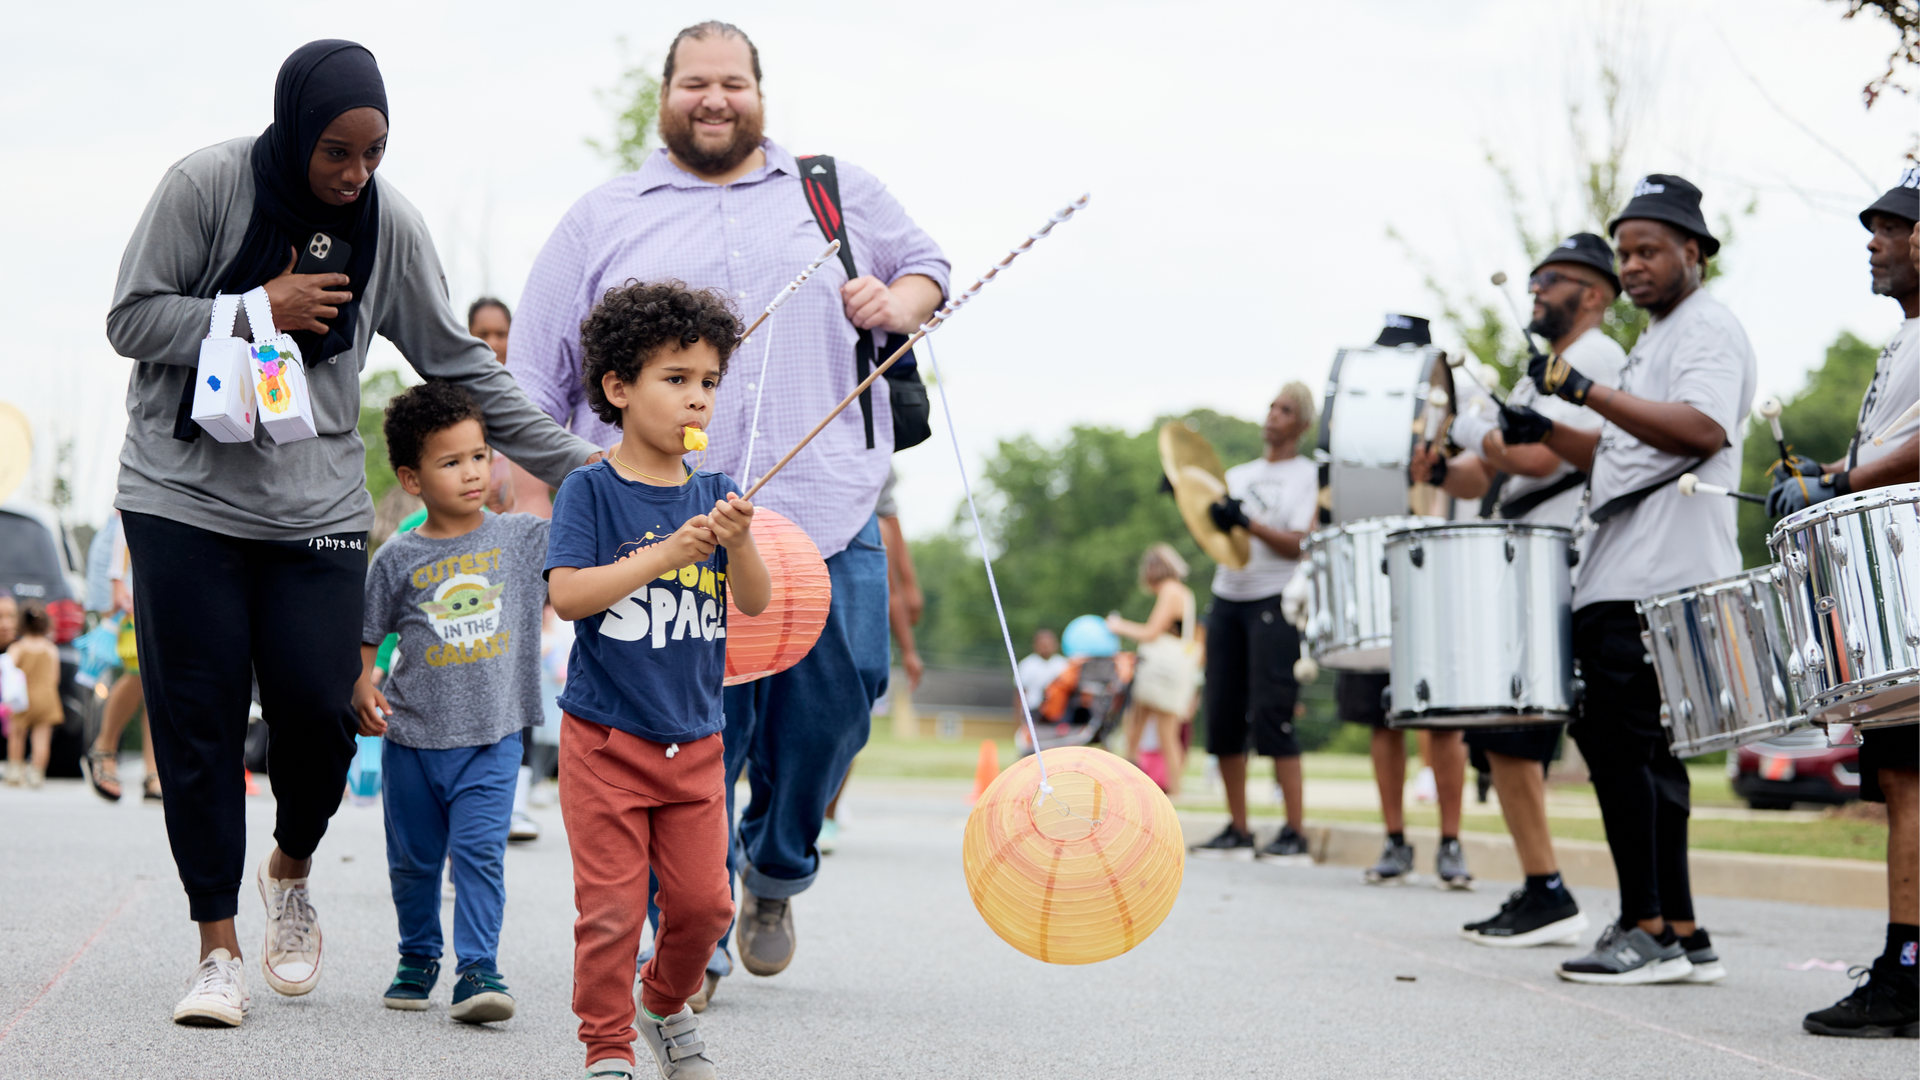 Children and their parents march with lanterns in the children's Lantern Parade at Pittsburgh Yards. (Photo Credit: Erin Sintos)